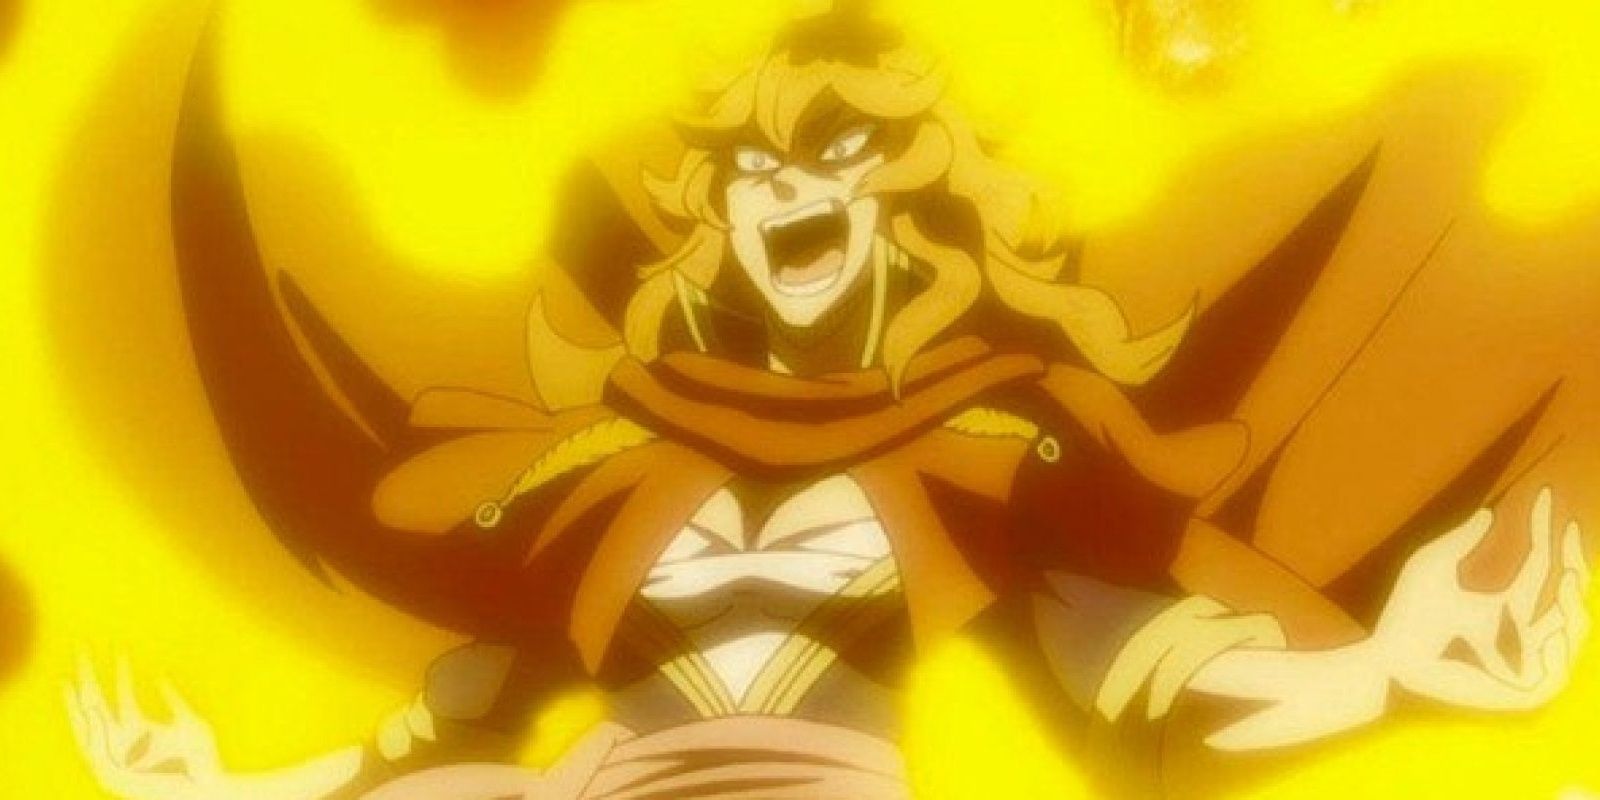 Mereoleona using an aura of flame in Black Clover.